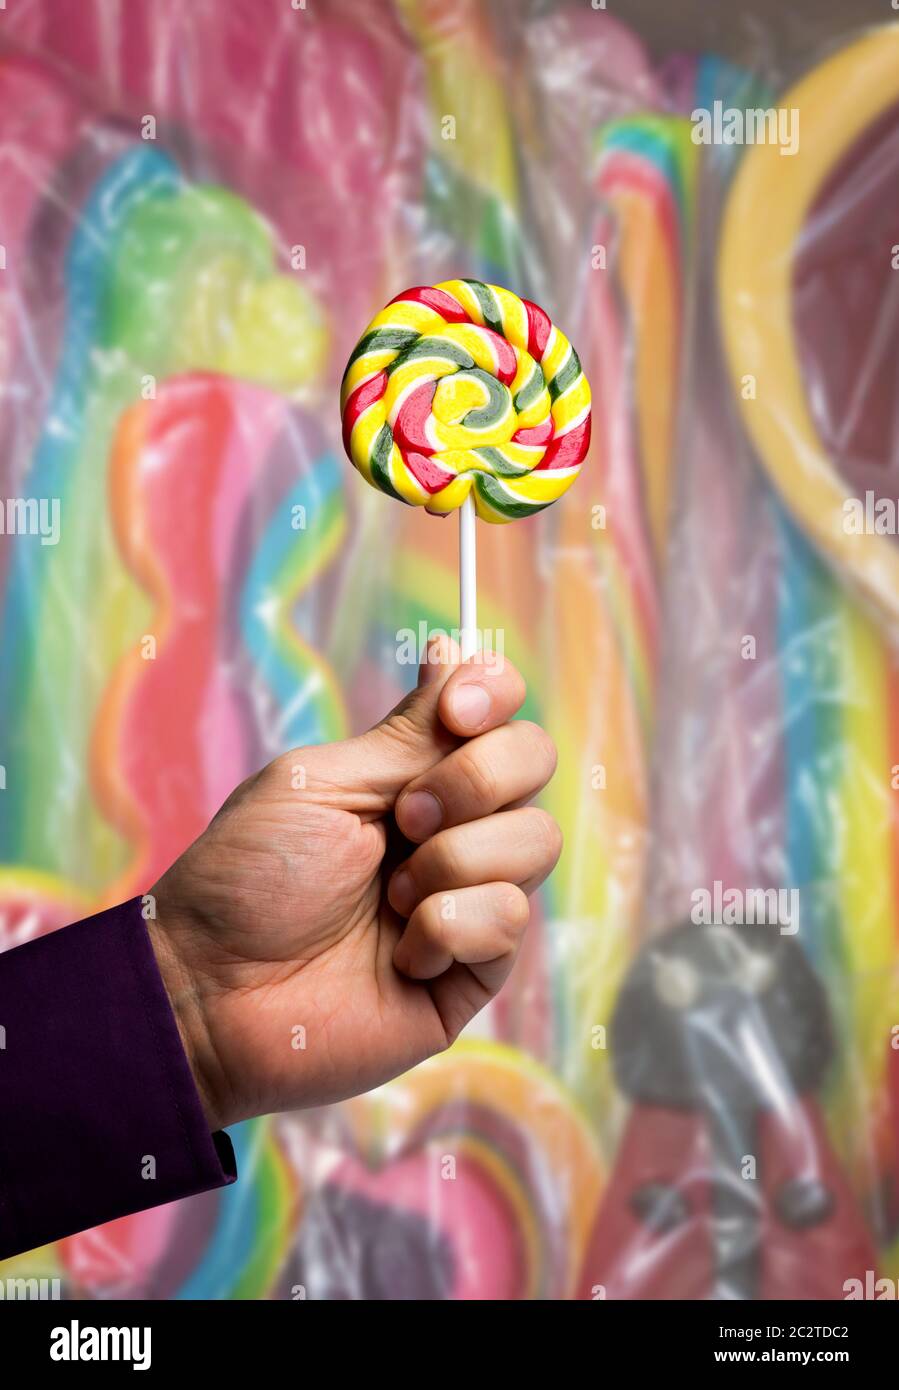 Male hand holding a multicolored lollipop Stock Photo